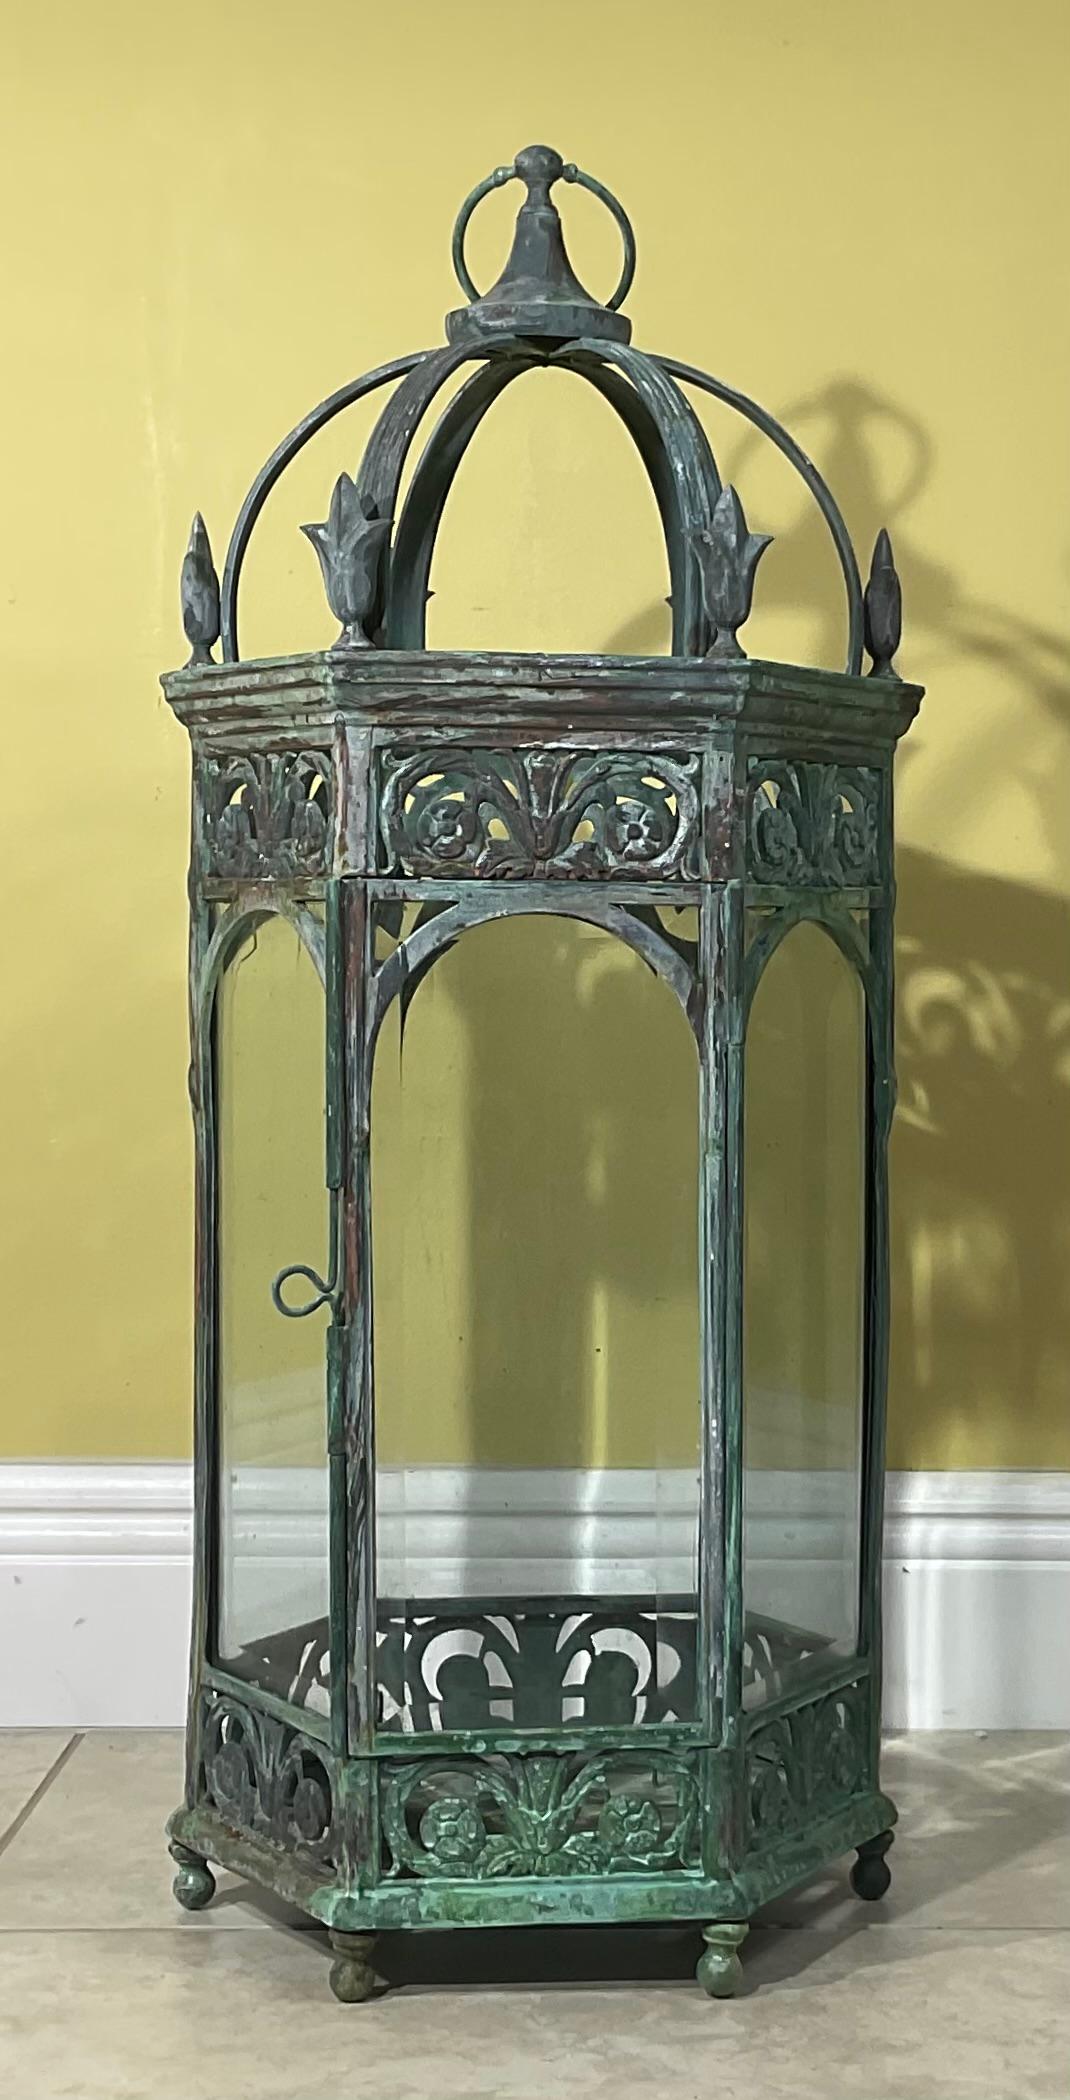 Beautiful of handcrafted lantern made of happy, solid bronze and brass exceptional quality and design workmanship, large space inside for three candles one door opening, bevelled glass all around and very decorative doom top. Nice greenish patina